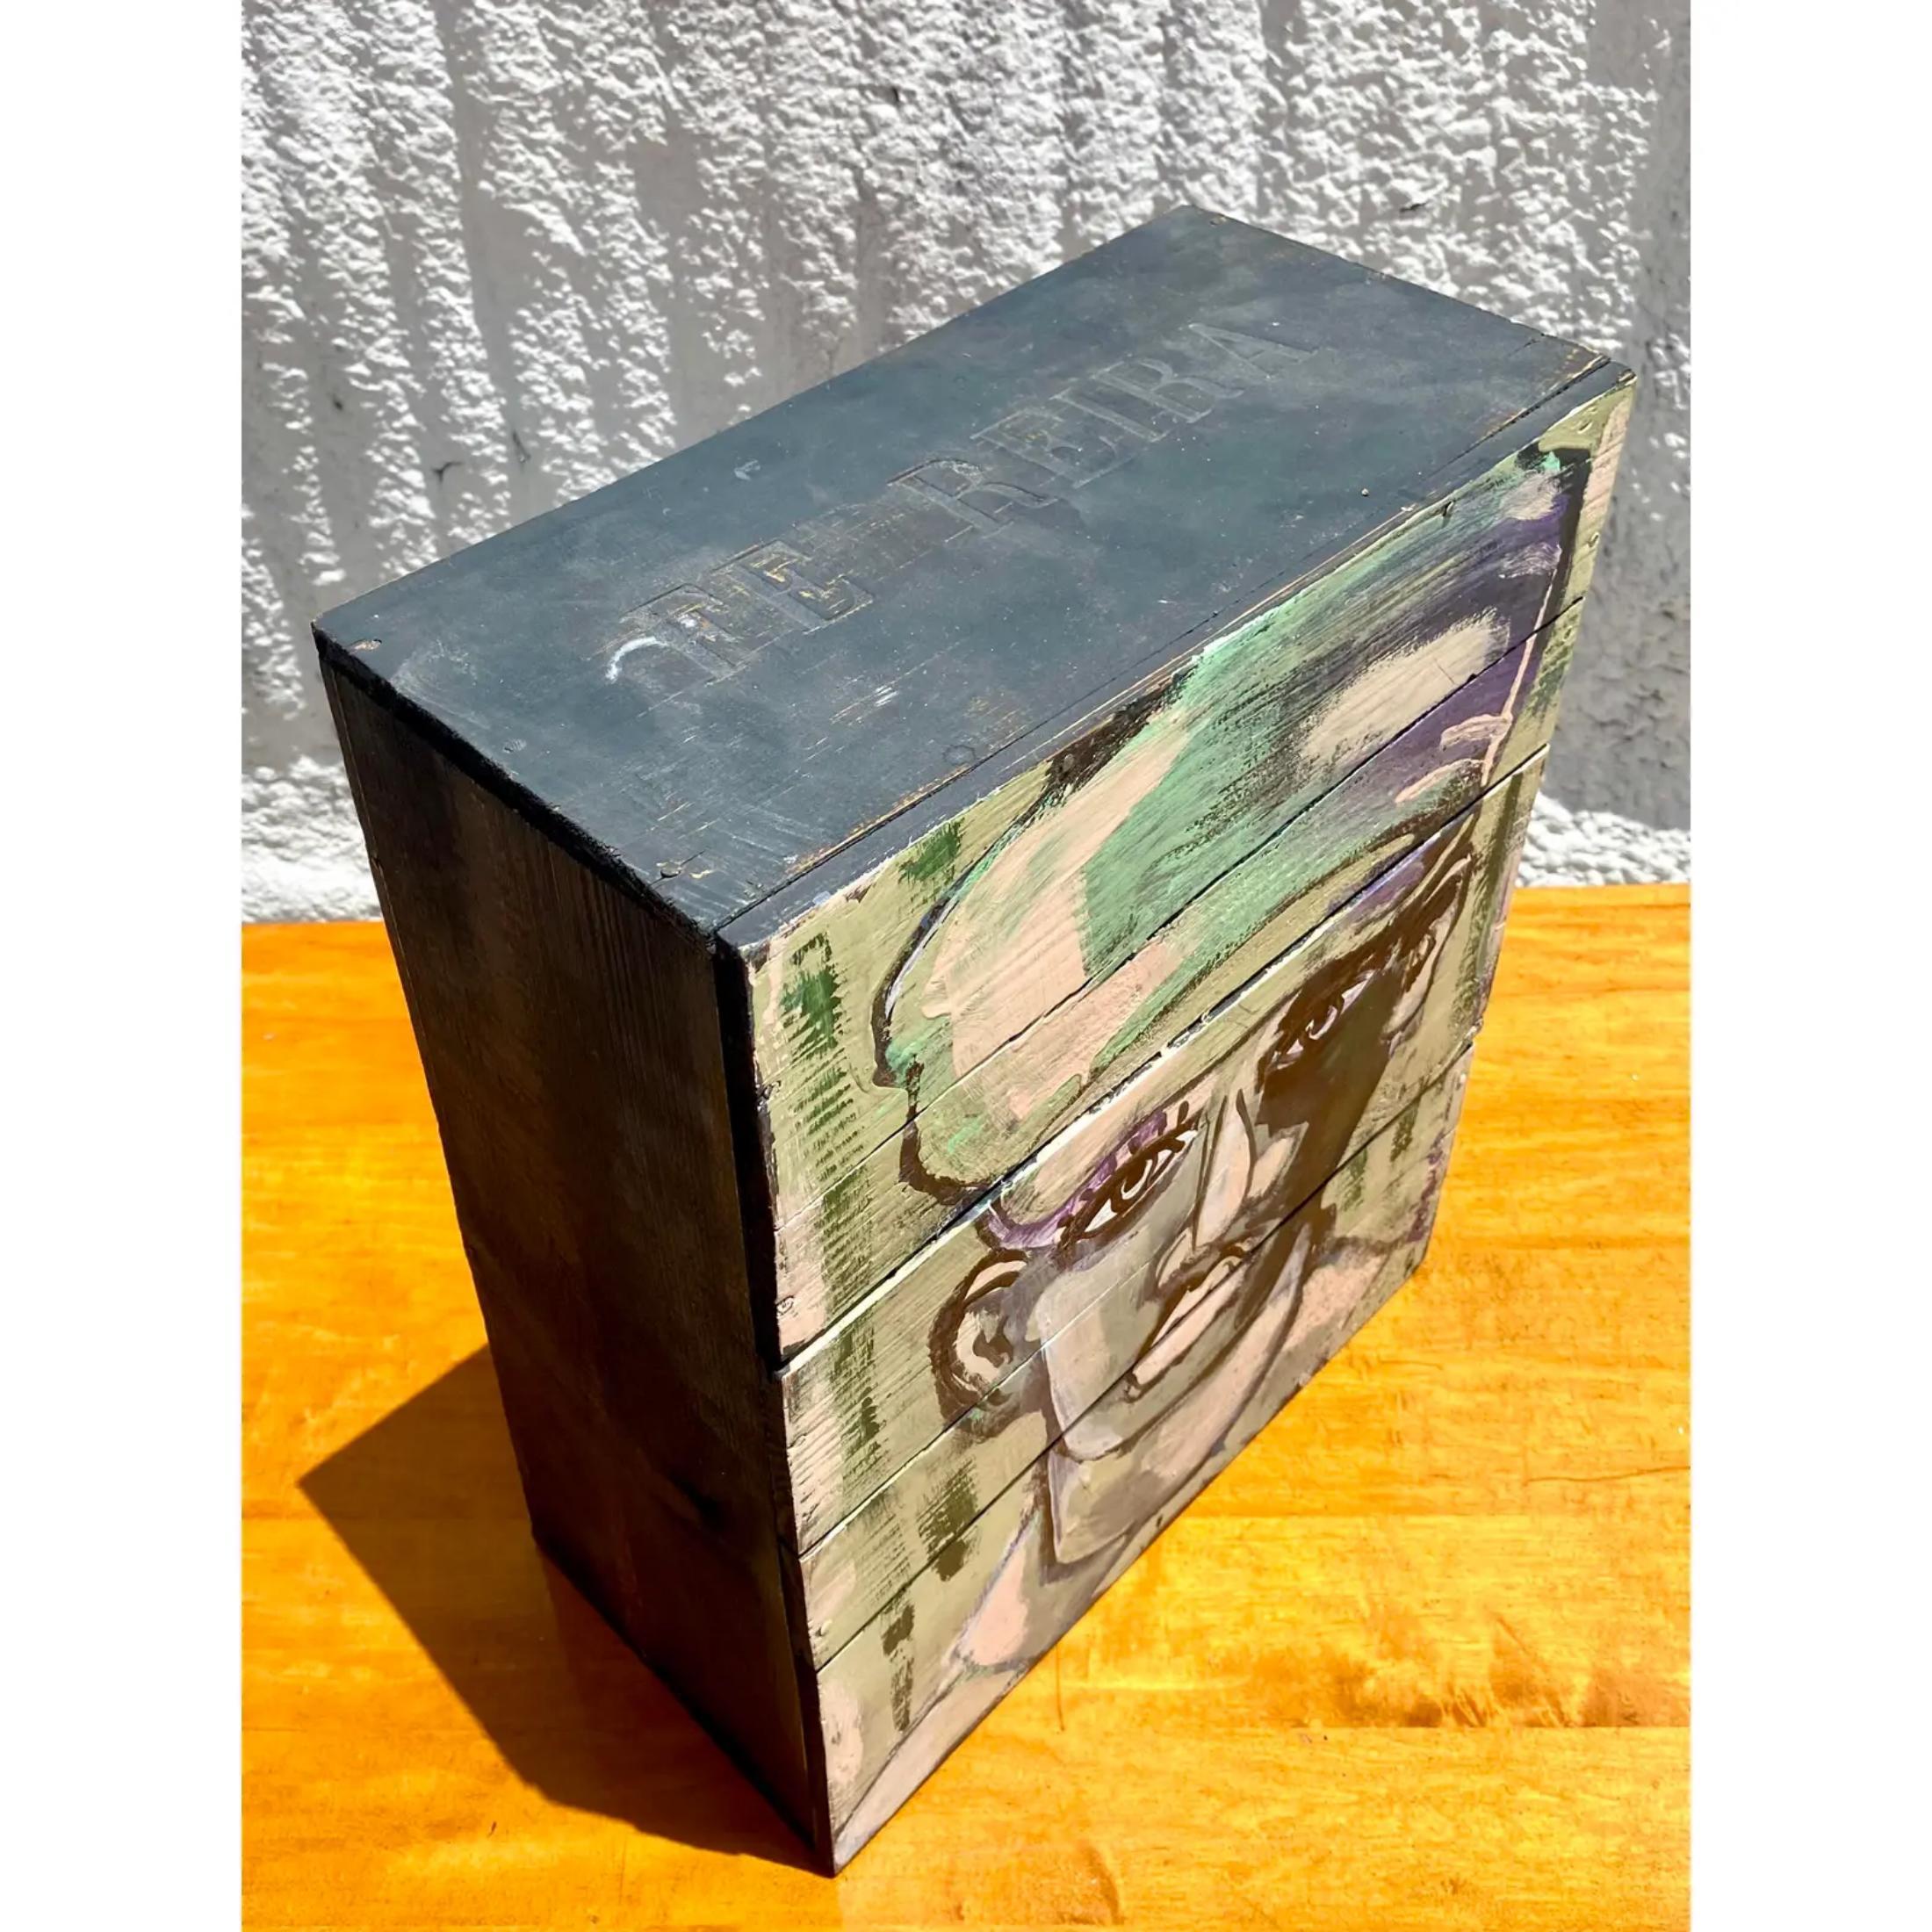 Striking Contemporary abstract oil portrait. A brilliant composition painted on a wooden box. Signed by the artist Roland. Acquired from a Palm Beach estate.